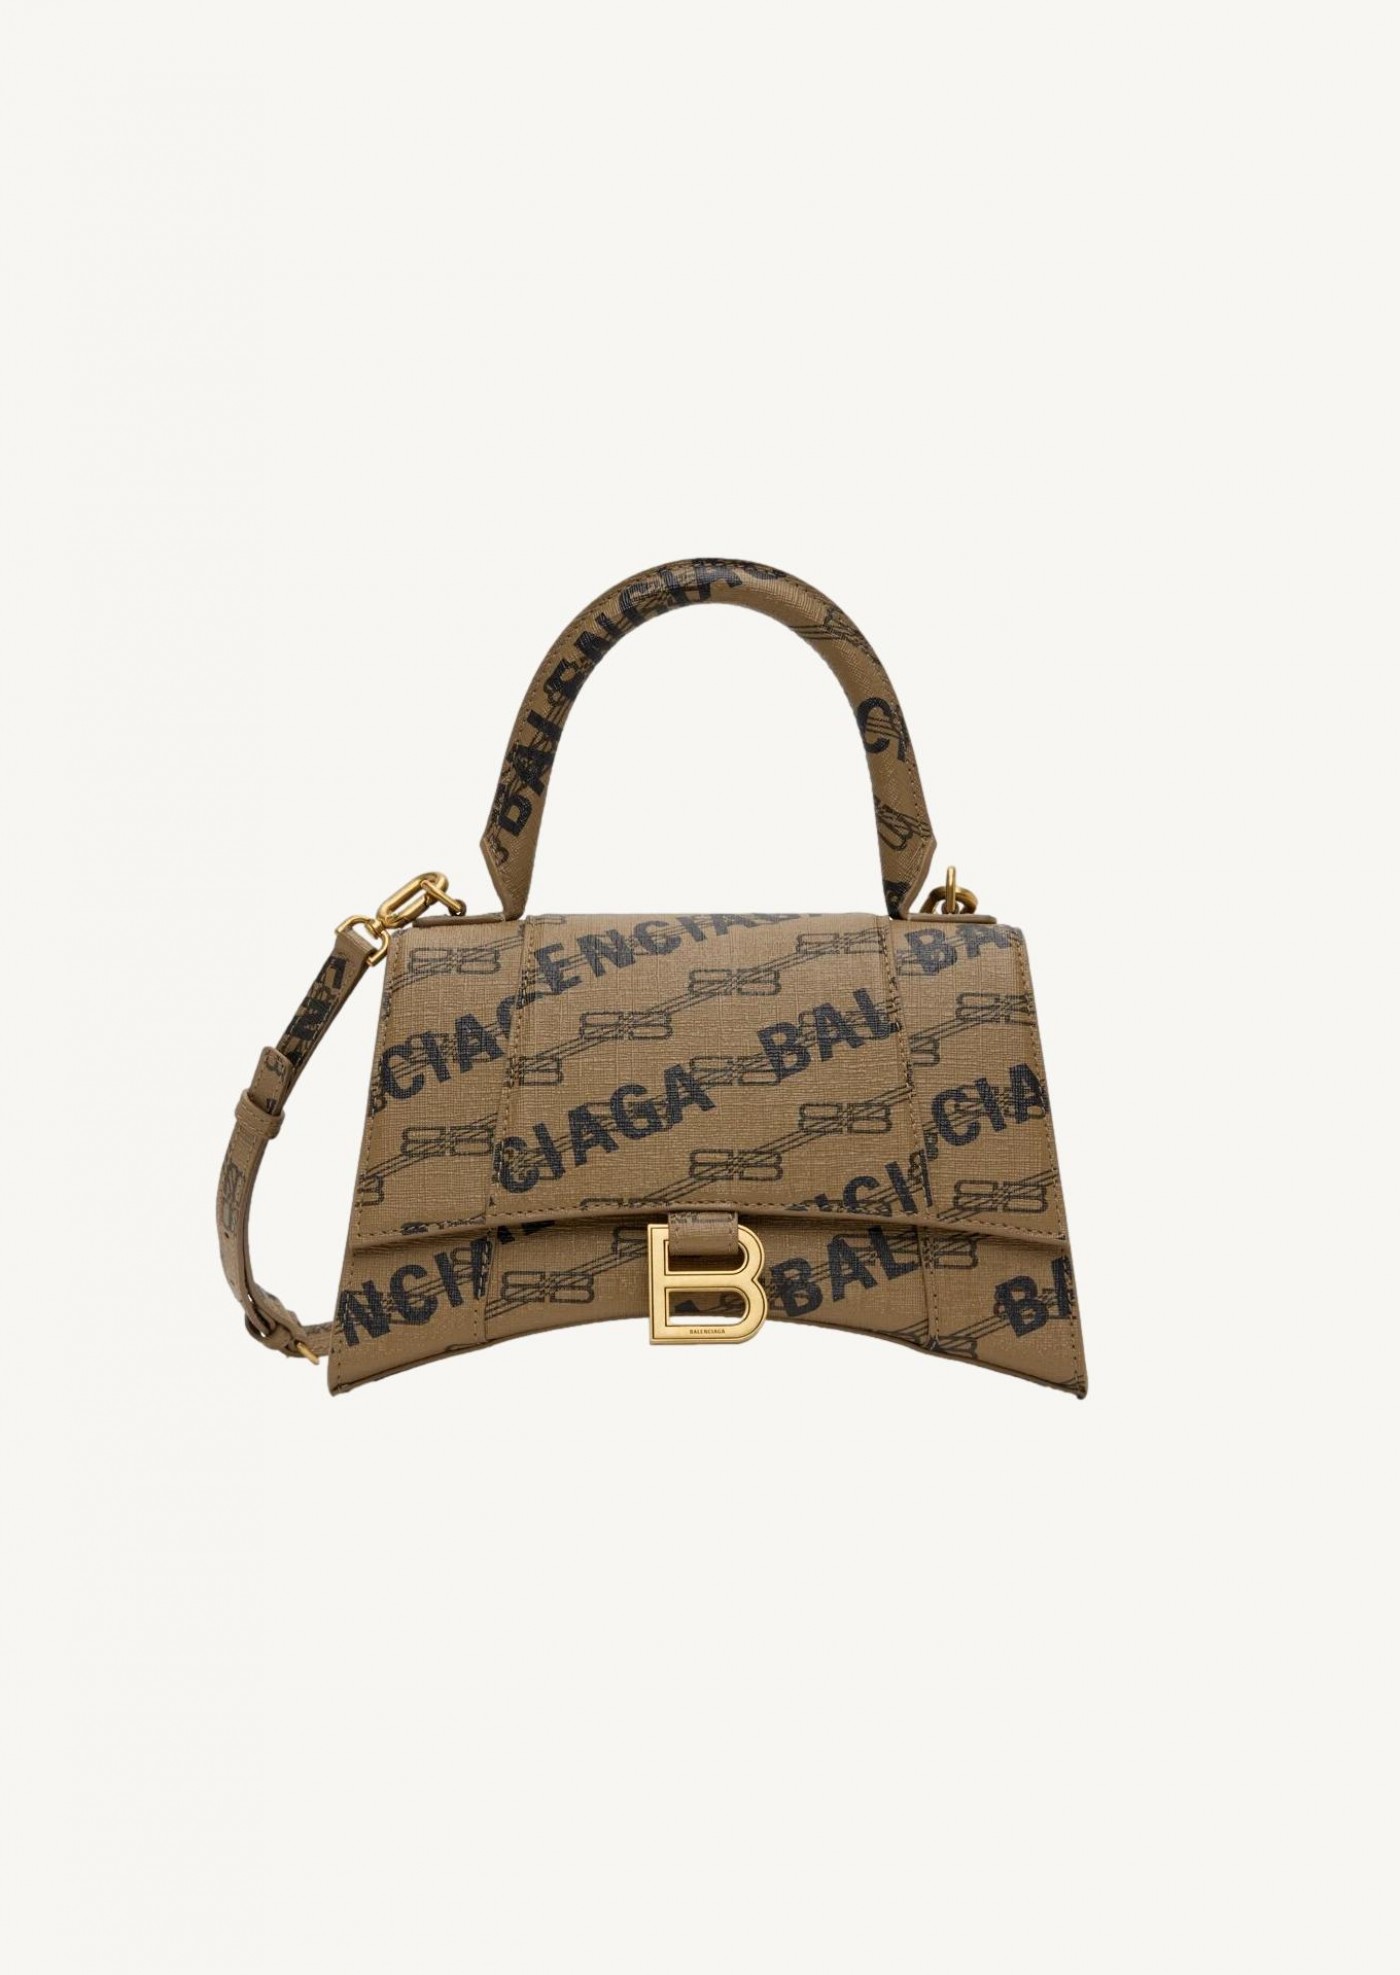 Hourglass Handbag in beige and brown BB Monogram coated canvas, aged-gold hardware - Balenciaga | Département Féminin